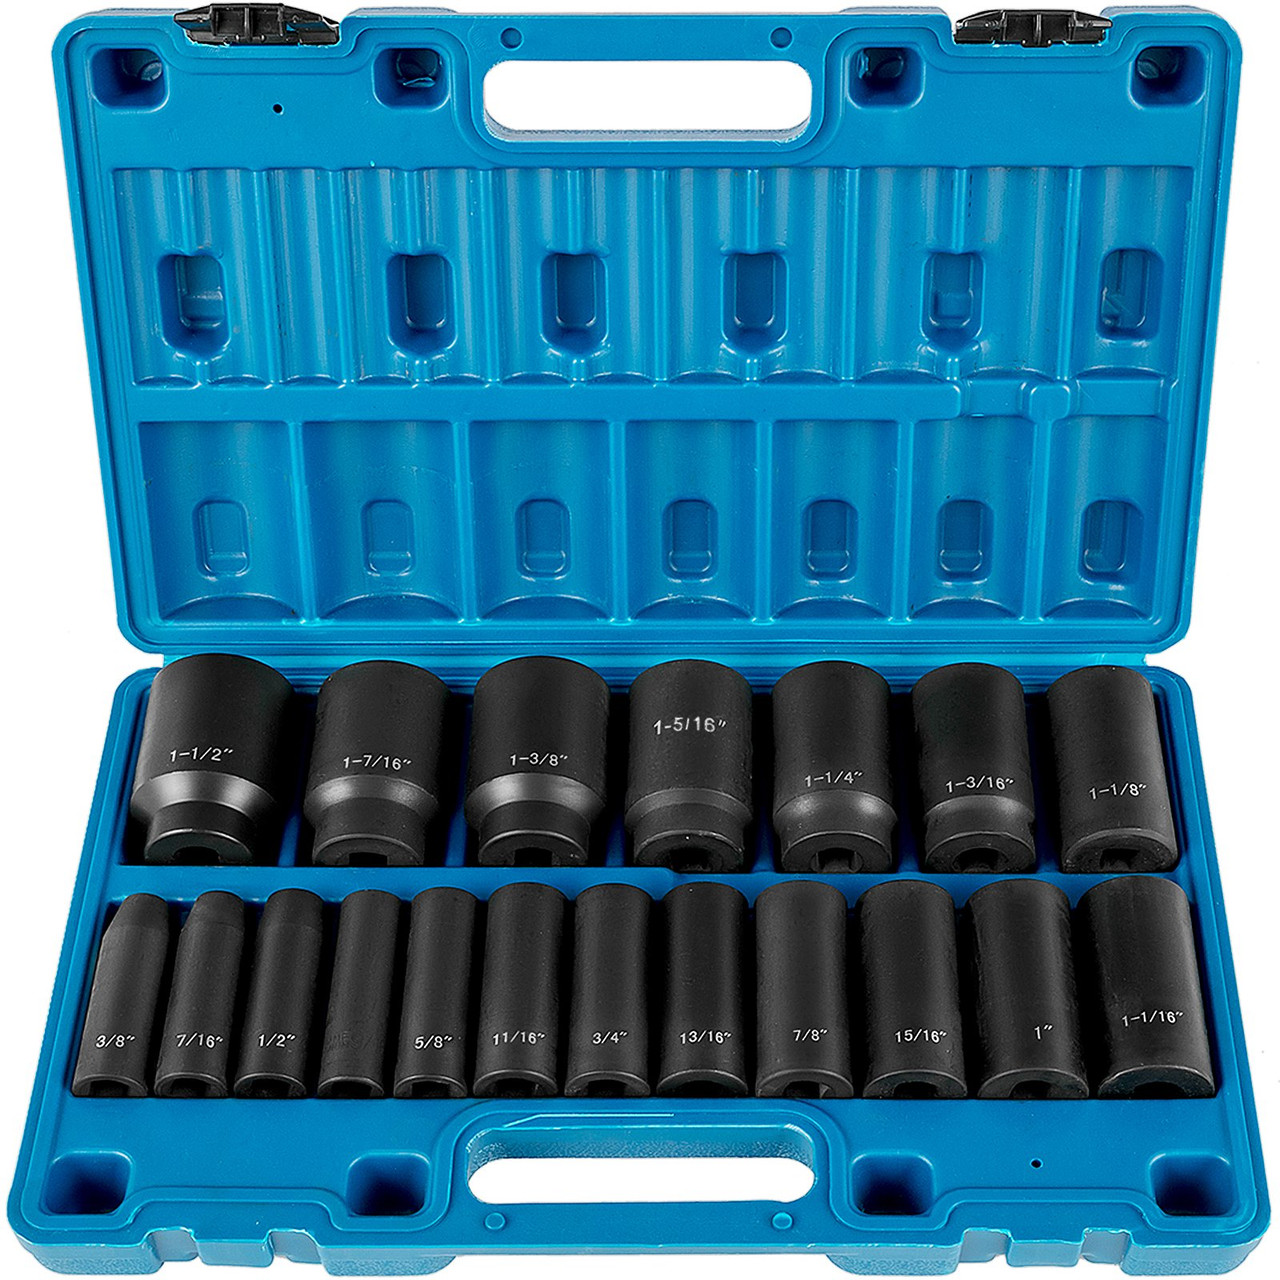 Impact Socket Set 1/2 Inches 19 Piece Impact Sockets, Deep Socket, 6-Point Sockets, Rugged Construction, Cr-V, 1/2 Inches Drive Socket Set Impact 3/8 inch - 1-1/2 inch, with a Storage Cage